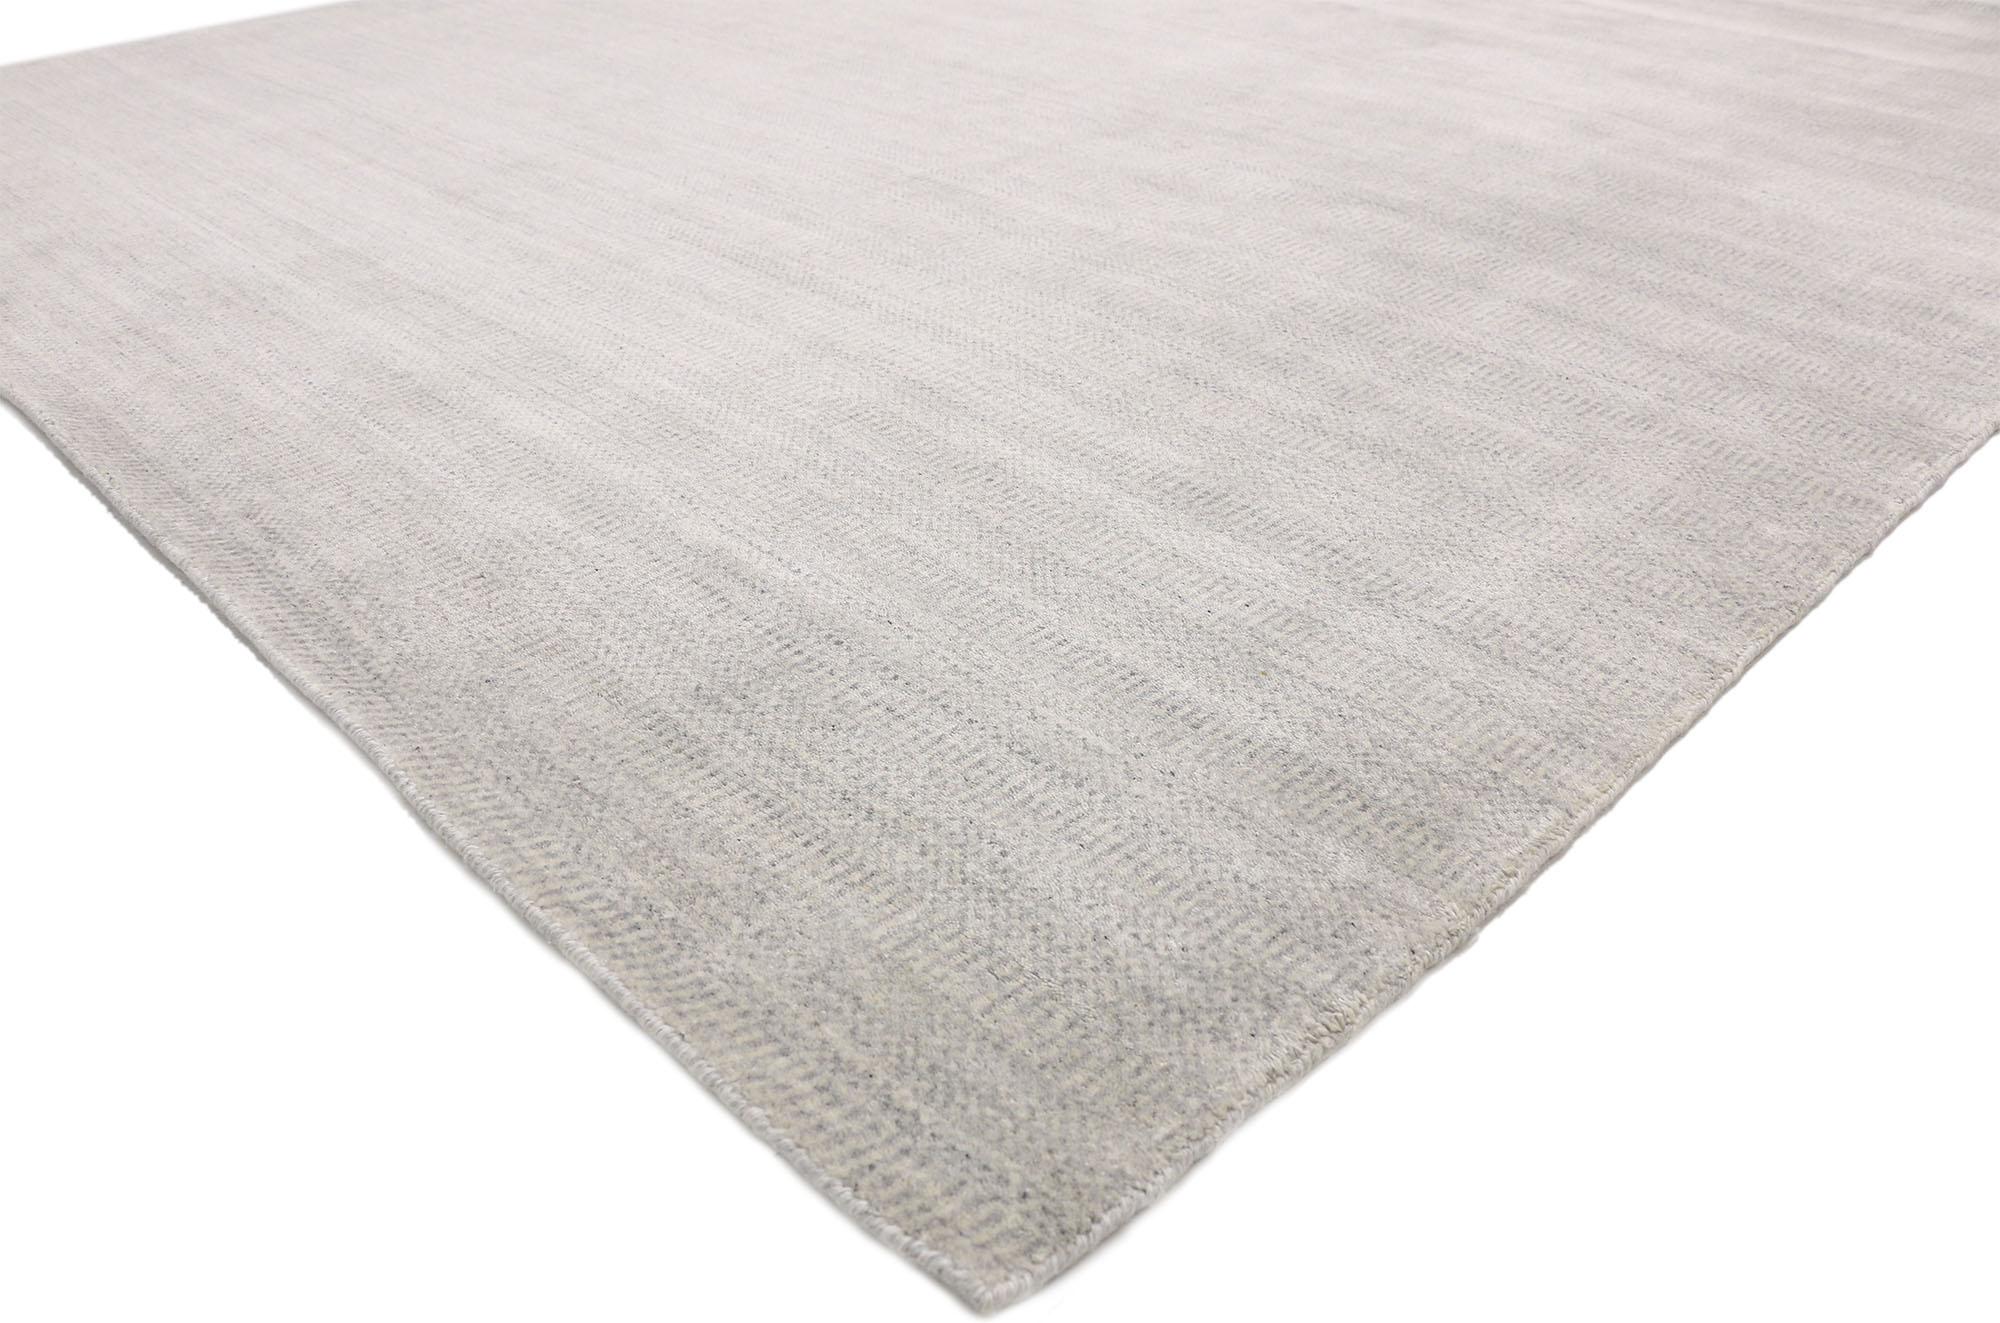 30438, new transitional light gray area rug with Scandinavian Modern style. Effortlessly chic and tastefully understated this new modern light gray area rug with Nordic style embodies wool's natural beauty and the elegance of a pale grayscale color